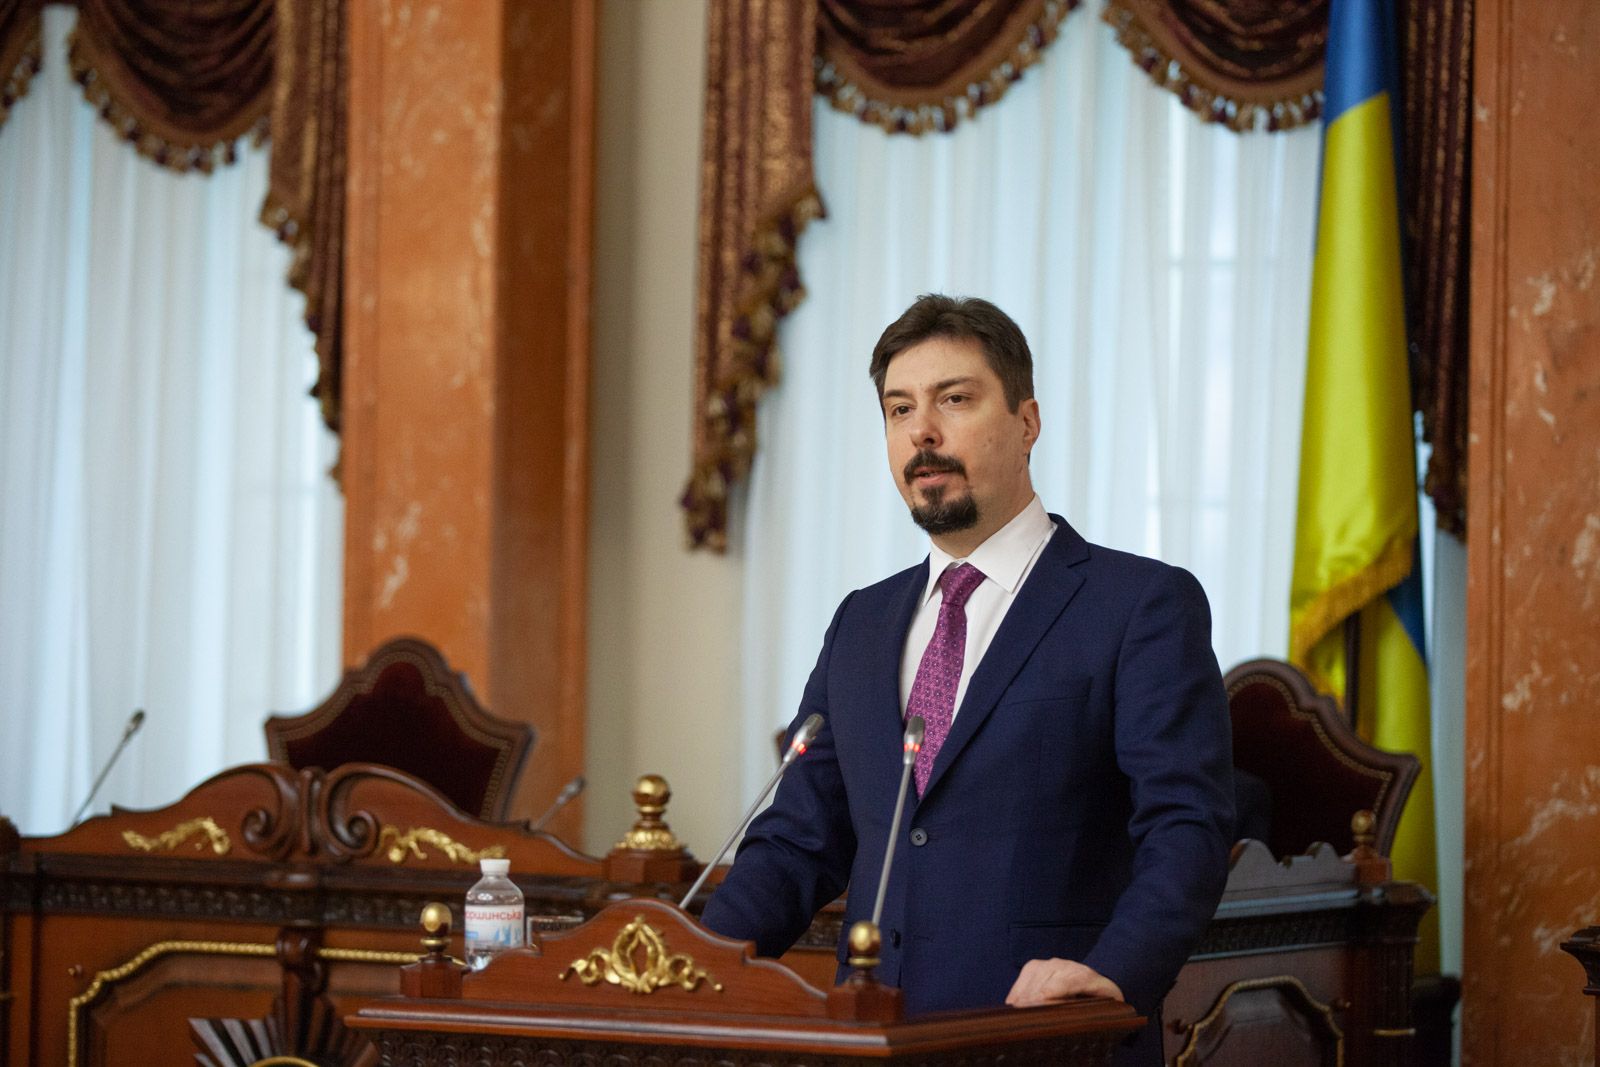 Ukraine’s judicial reform has mixed reviews as it nears key point